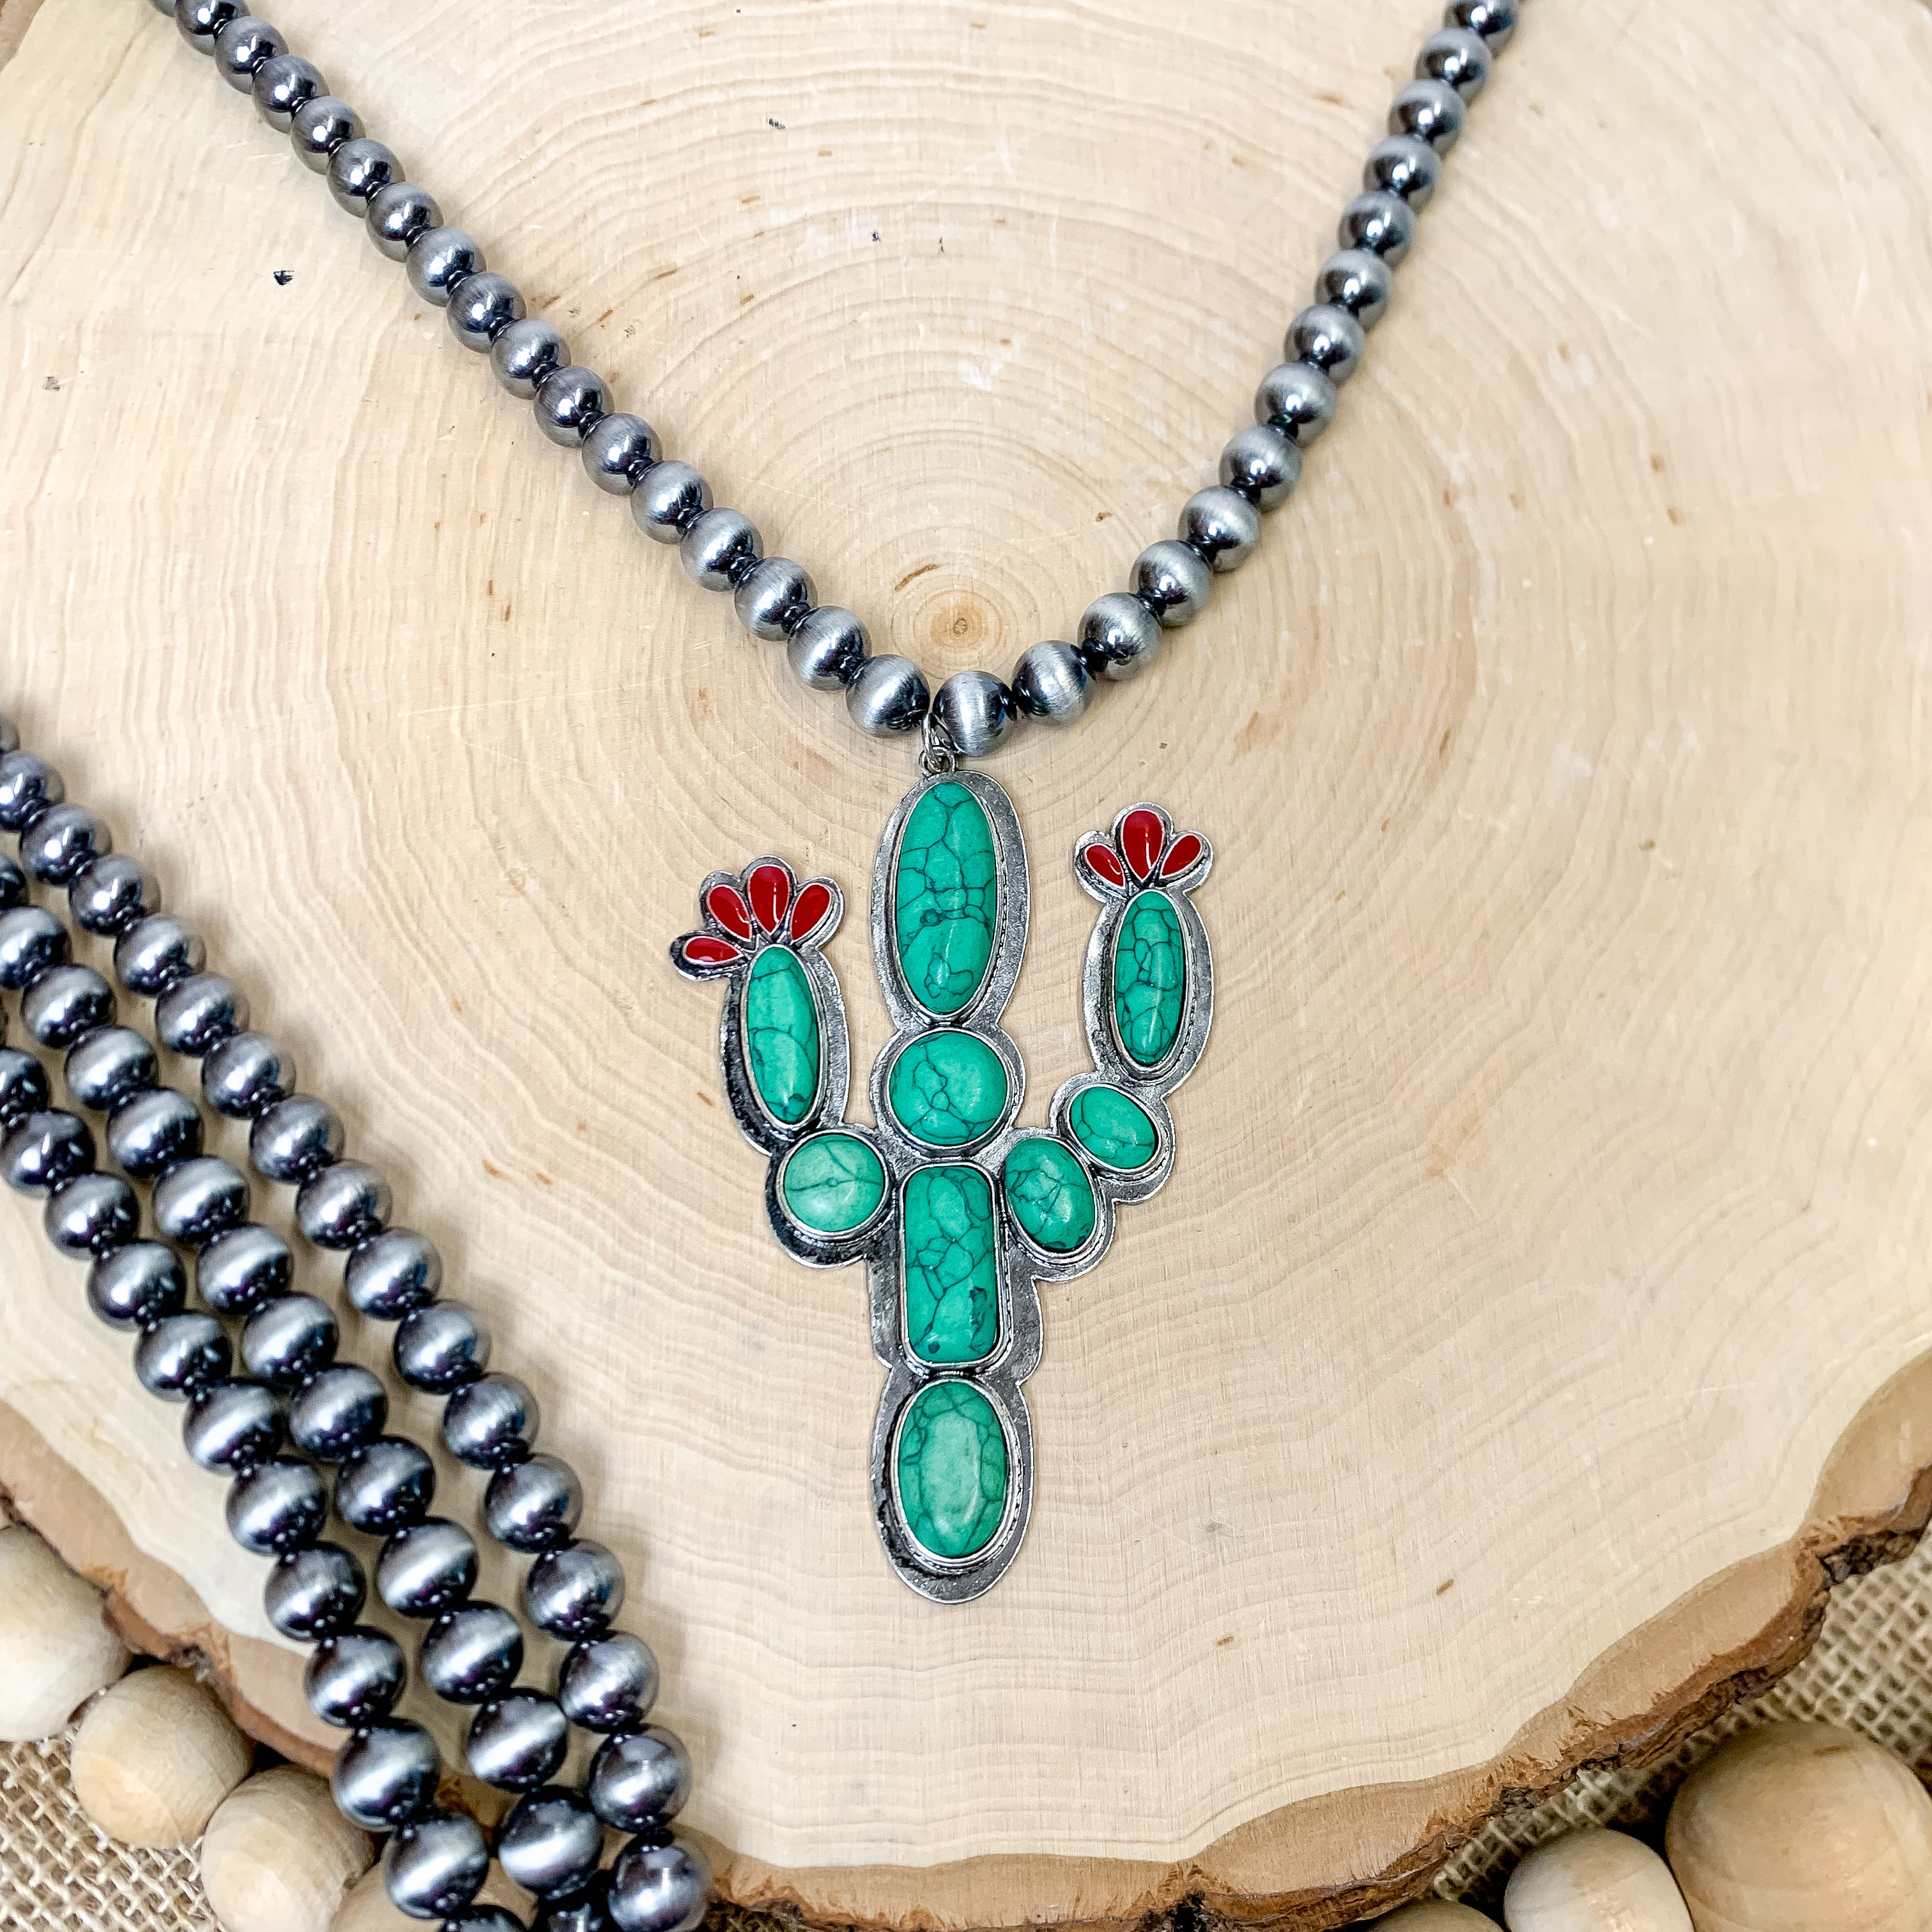 Faux Navajo Pearl Silver Tone Necklace with Stone Cactus Pendant in Green and Red